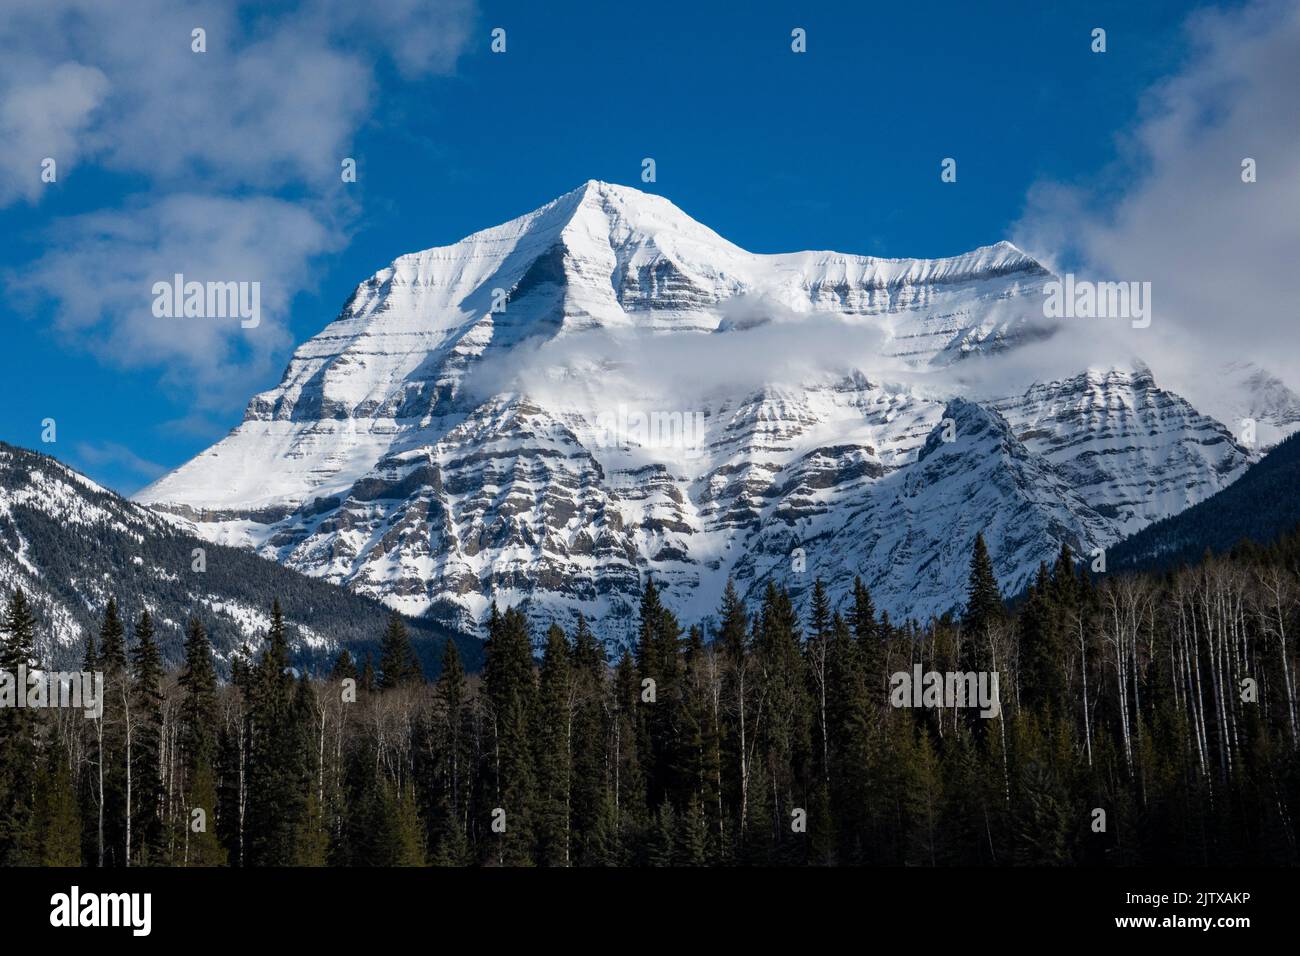 Mount Robson, British Columbia, Canada, the highest mountain in the Canadian Rocky Mountains. Stock Photo